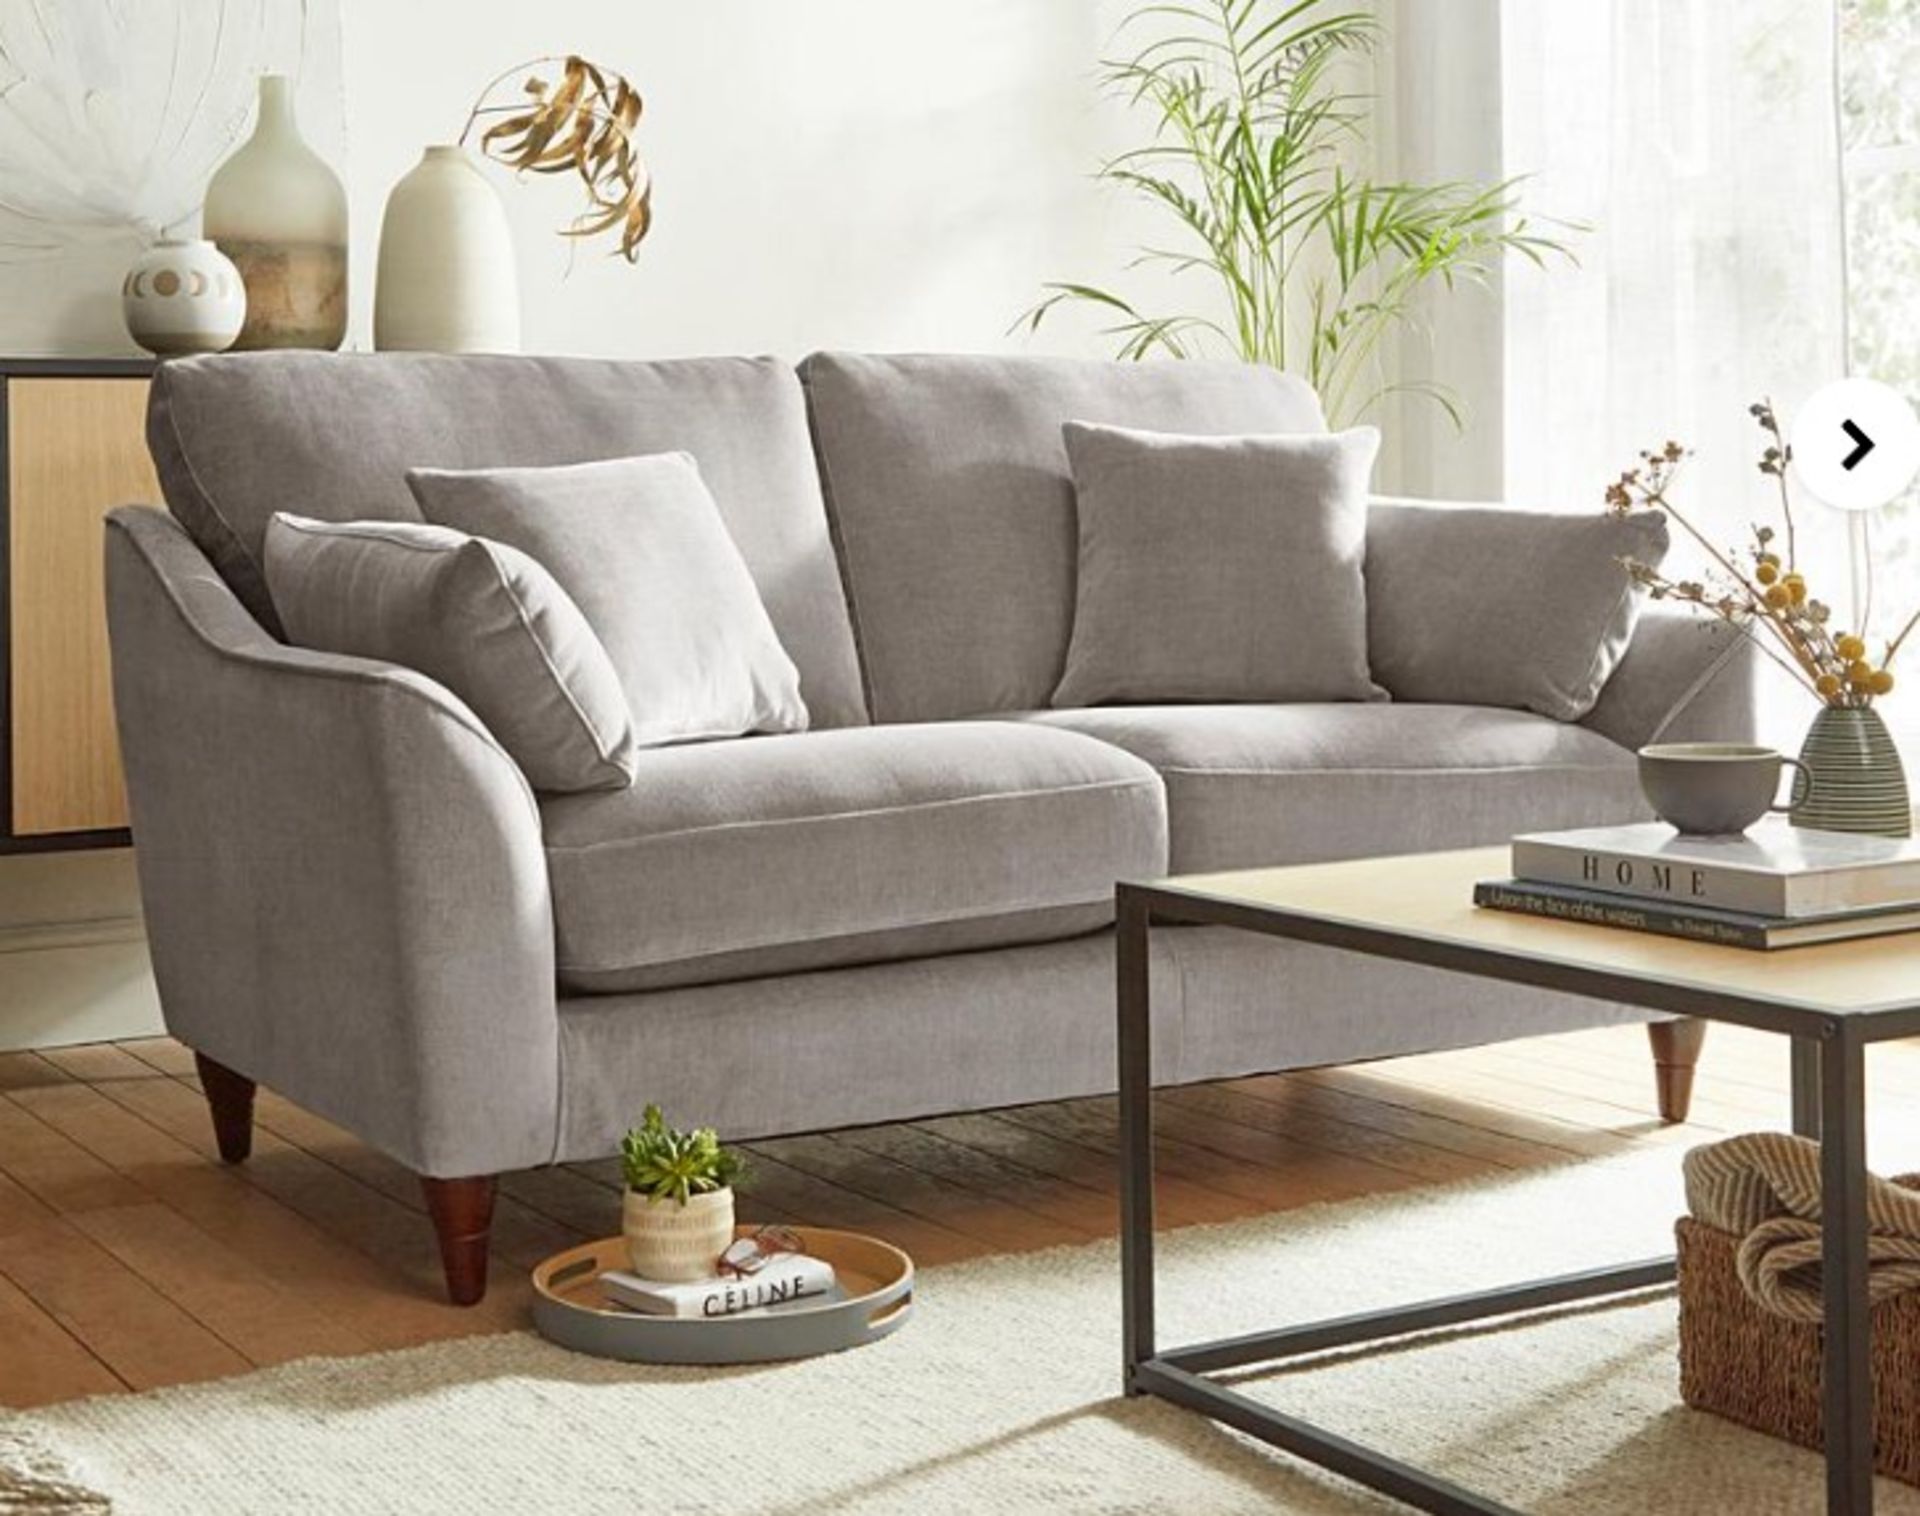 Hepburn 2 Seater Sofa. - ER23. RRP £1,249.00. The Hepburn 2 Seater Sofa features a classic, curved